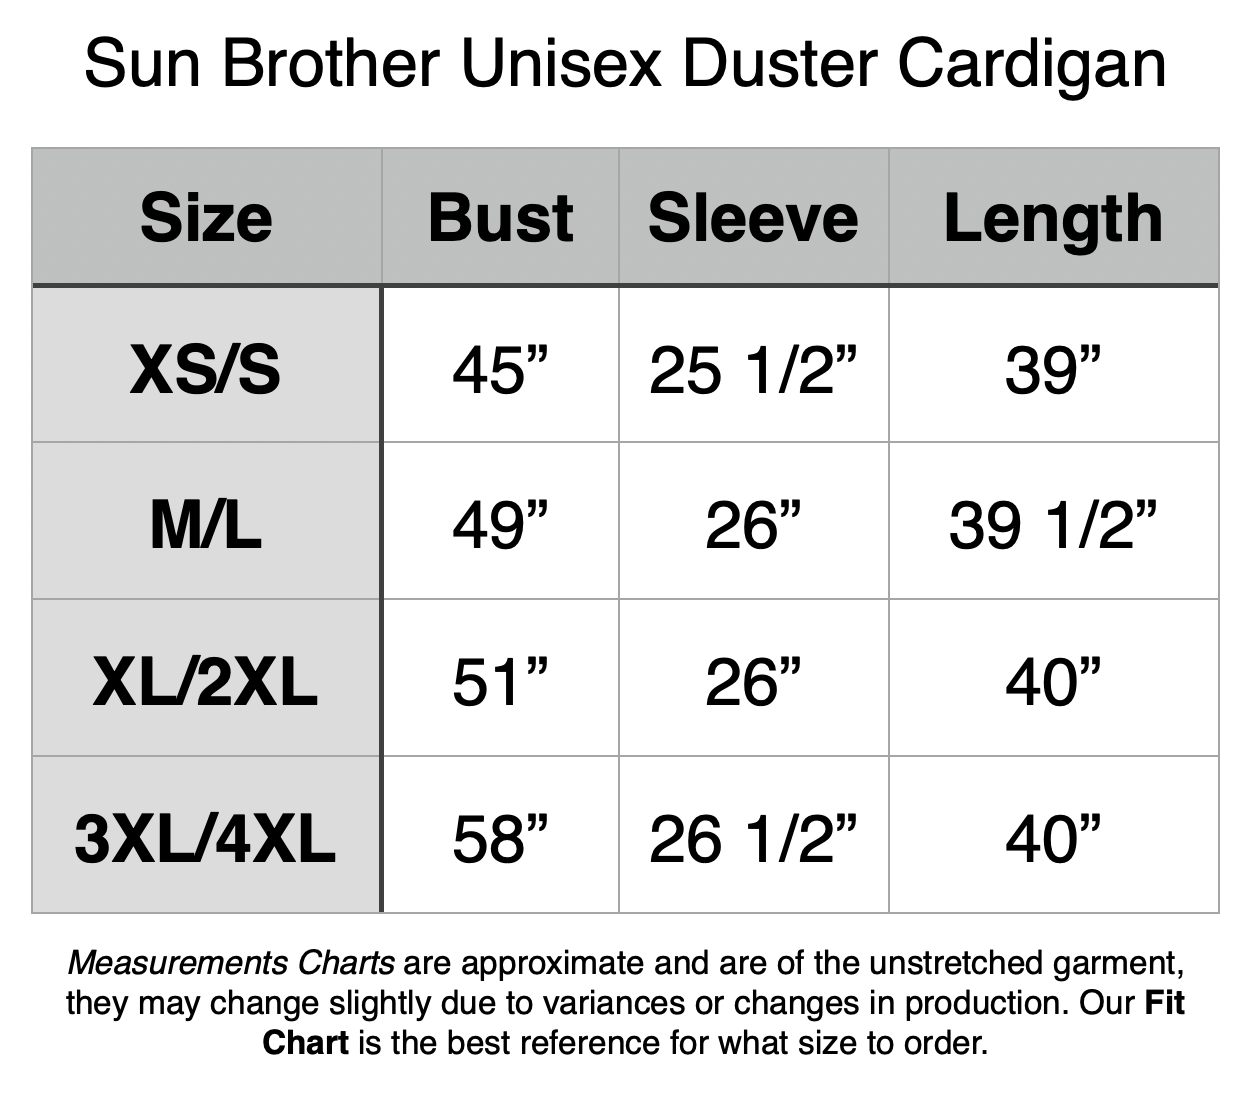 Sun Brother Unisex Duster Cardigan: XS/S - 45” Bust, 25.5” Sleeve, 39” Length. M/L - 49” Bust, 26” Sleeve, 39.5” Length. XL/2XL - 51” Bust, 26” Sleeve, 40” Length. 3XL/4XL - 58” Bust, 26.5” Sleeve, 40” Length.